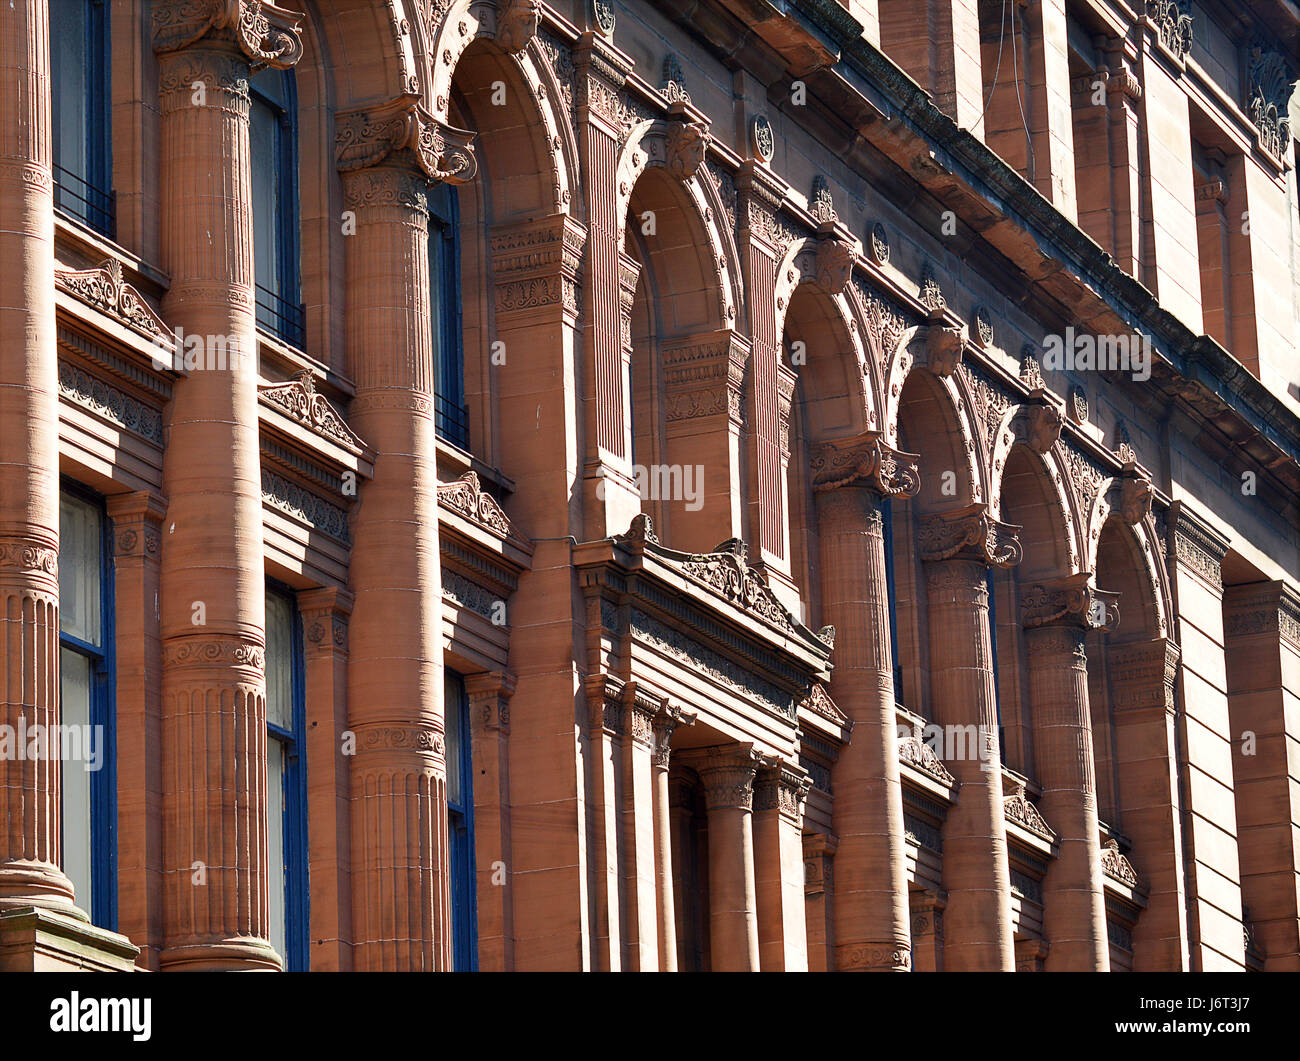 Glasgow Scotland's Victorian Architecture: columns, decorated friezes and lintels from an 1895 red sandstone commercial building Stock Photo